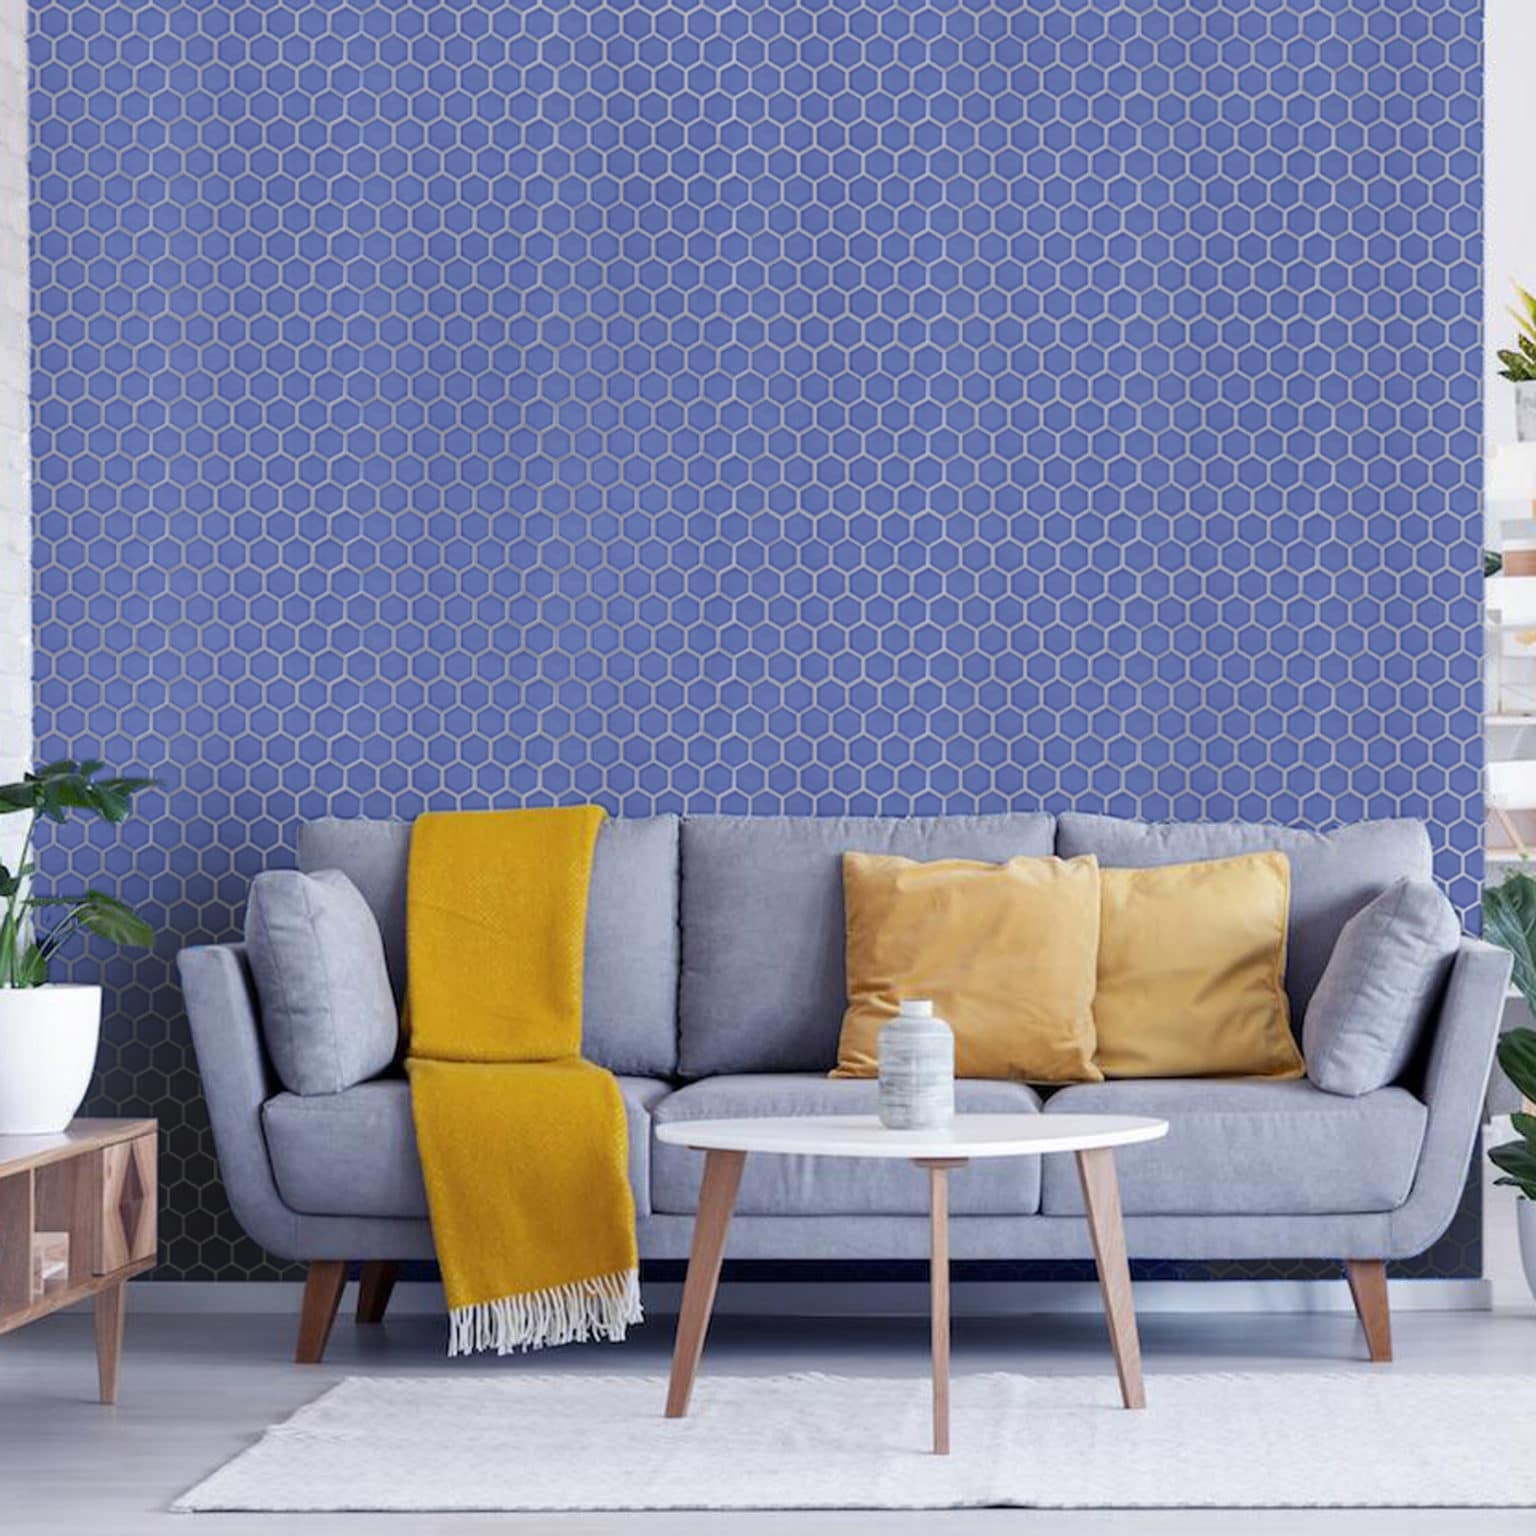 Periwinkle hex mosaic accent wall 